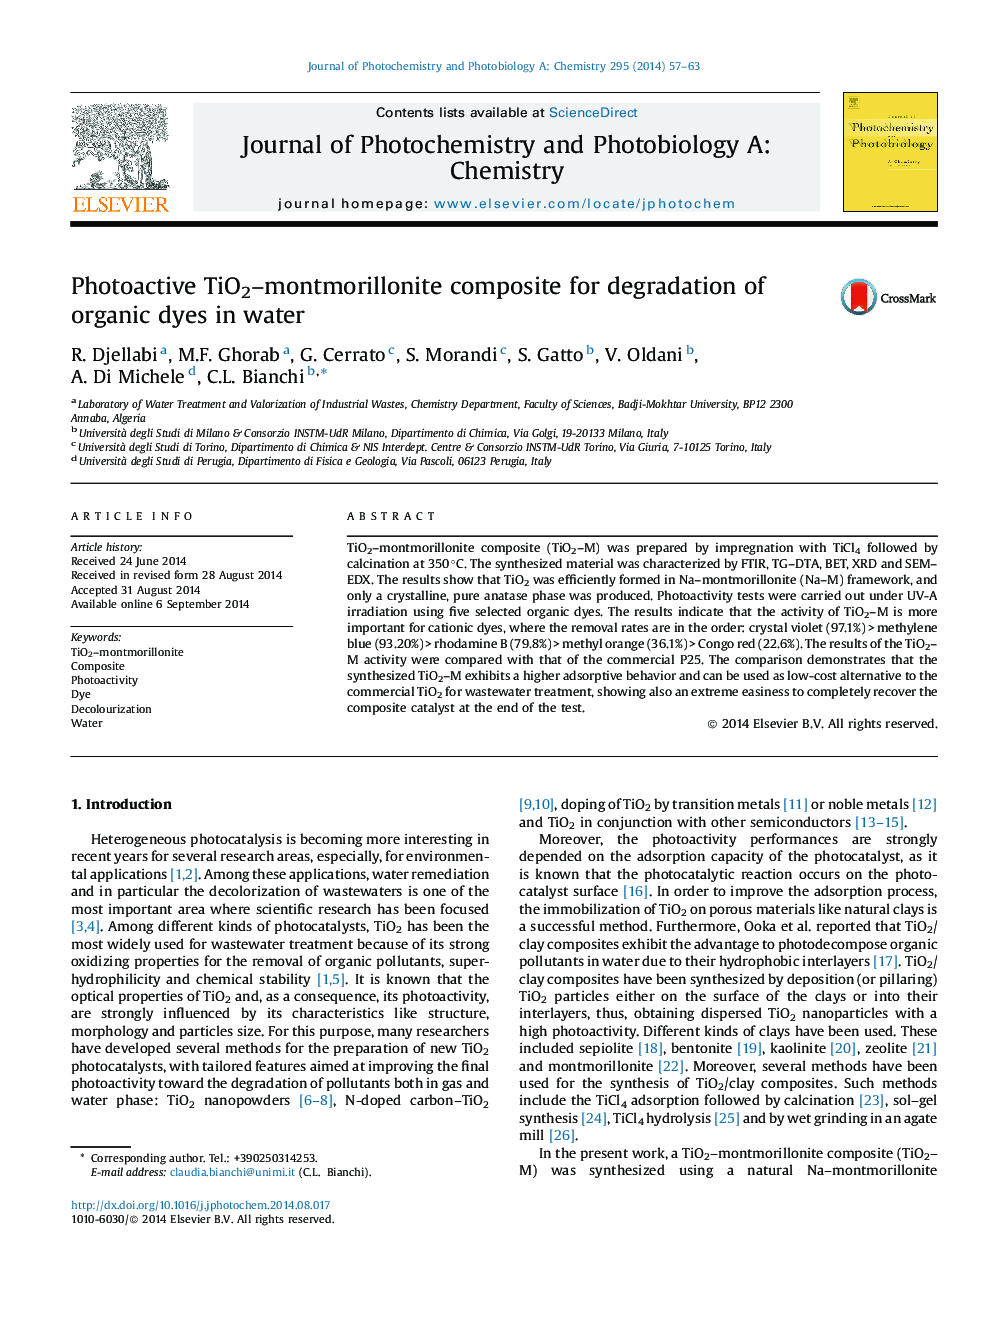 Photoactive TiO2–montmorillonite composite for degradation of organic dyes in water